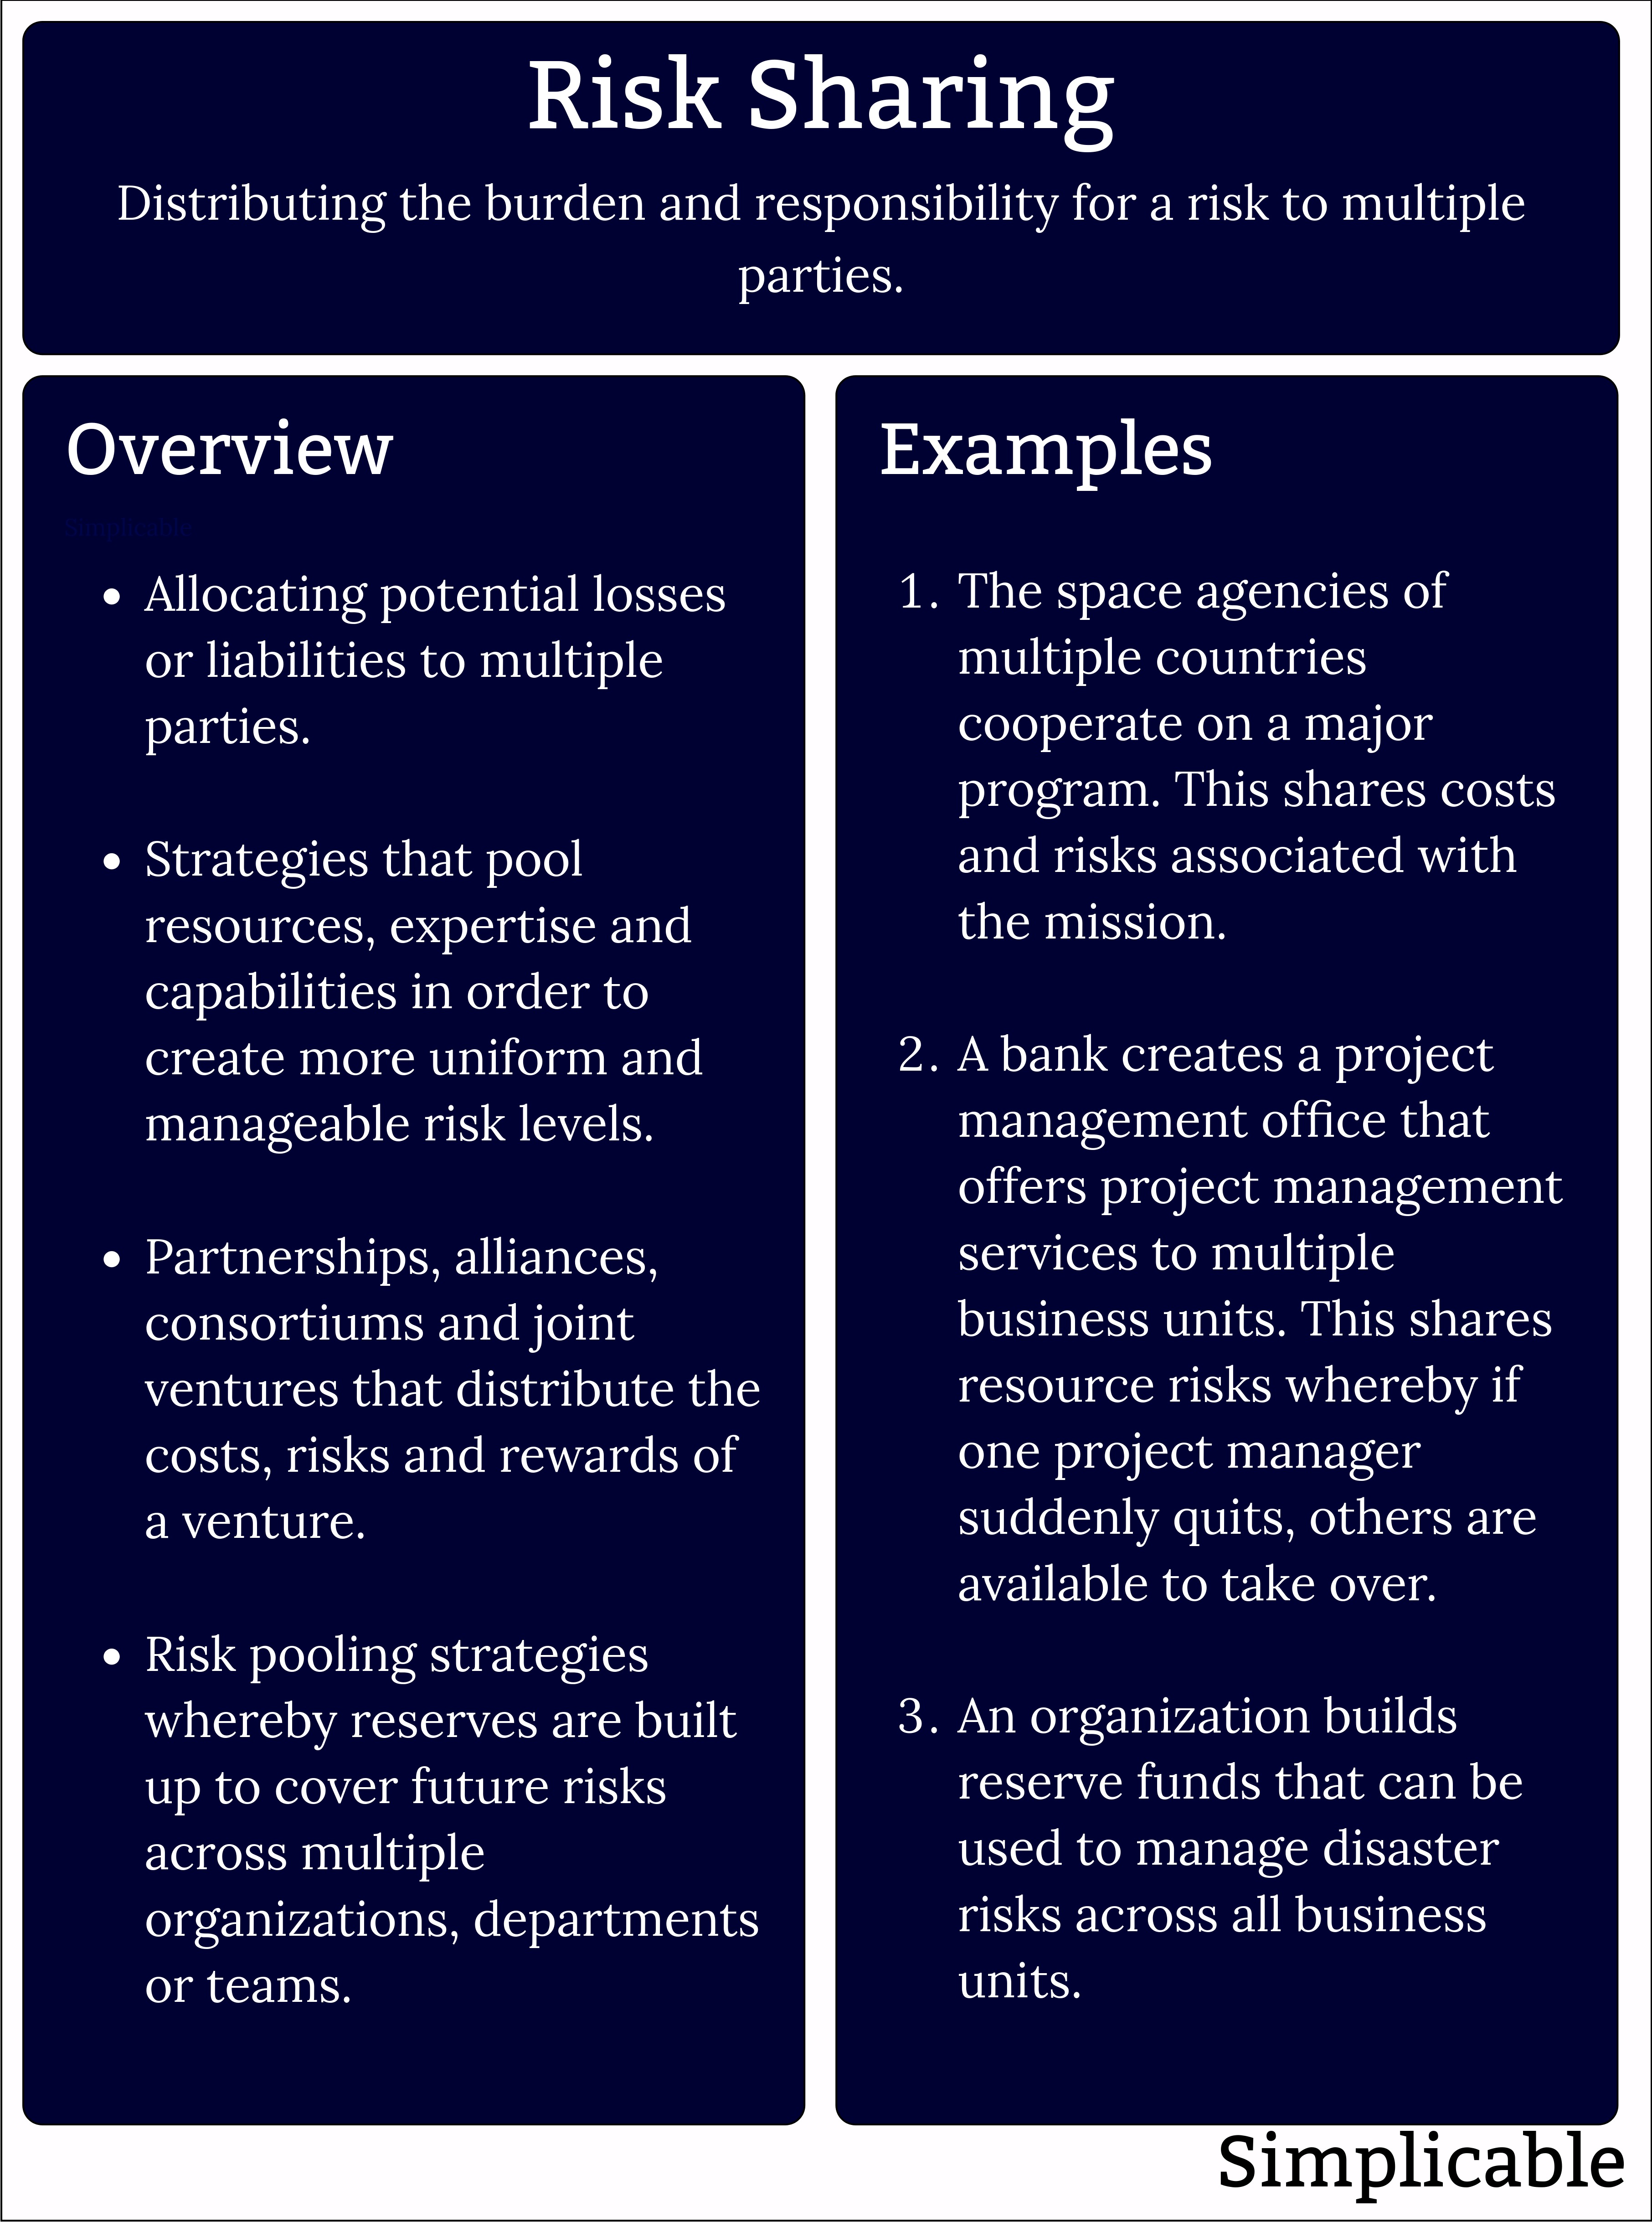 risk sharing overview and examples